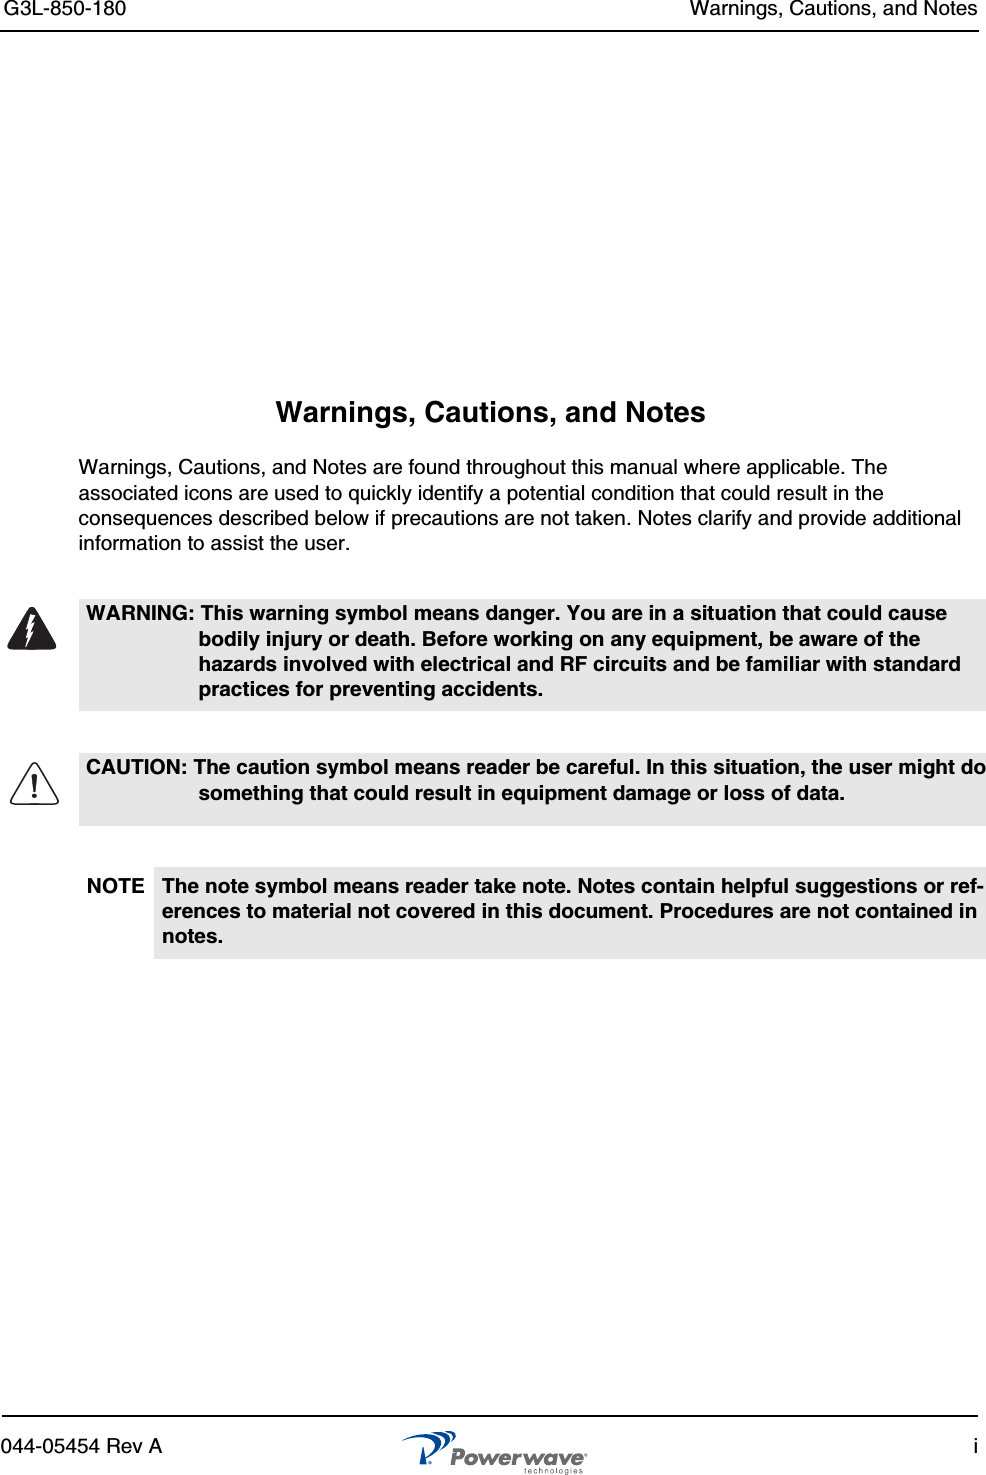 G3L-850-180 Warnings, Cautions, and Notes044-05454 Rev A iWarnings, Cautions, and NotesWarnings, Cautions, and Notes are found throughout this manual where applicable. The associated icons are used to quickly identify a potential condition that could result in the consequences described below if precautions are not taken. Notes clarify and provide additional information to assist the user.WARNING: This warning symbol means danger. You are in a situation that could cause bodily injury or death. Before working on any equipment, be aware of the hazards involved with electrical and RF circuits and be familiar with standard practices for preventing accidents.CAUTION: The caution symbol means reader be careful. In this situation, the user might do something that could result in equipment damage or loss of data. NOTE The note symbol means reader take note. Notes contain helpful suggestions or ref-erences to material not covered in this document. Procedures are not contained in notes. 